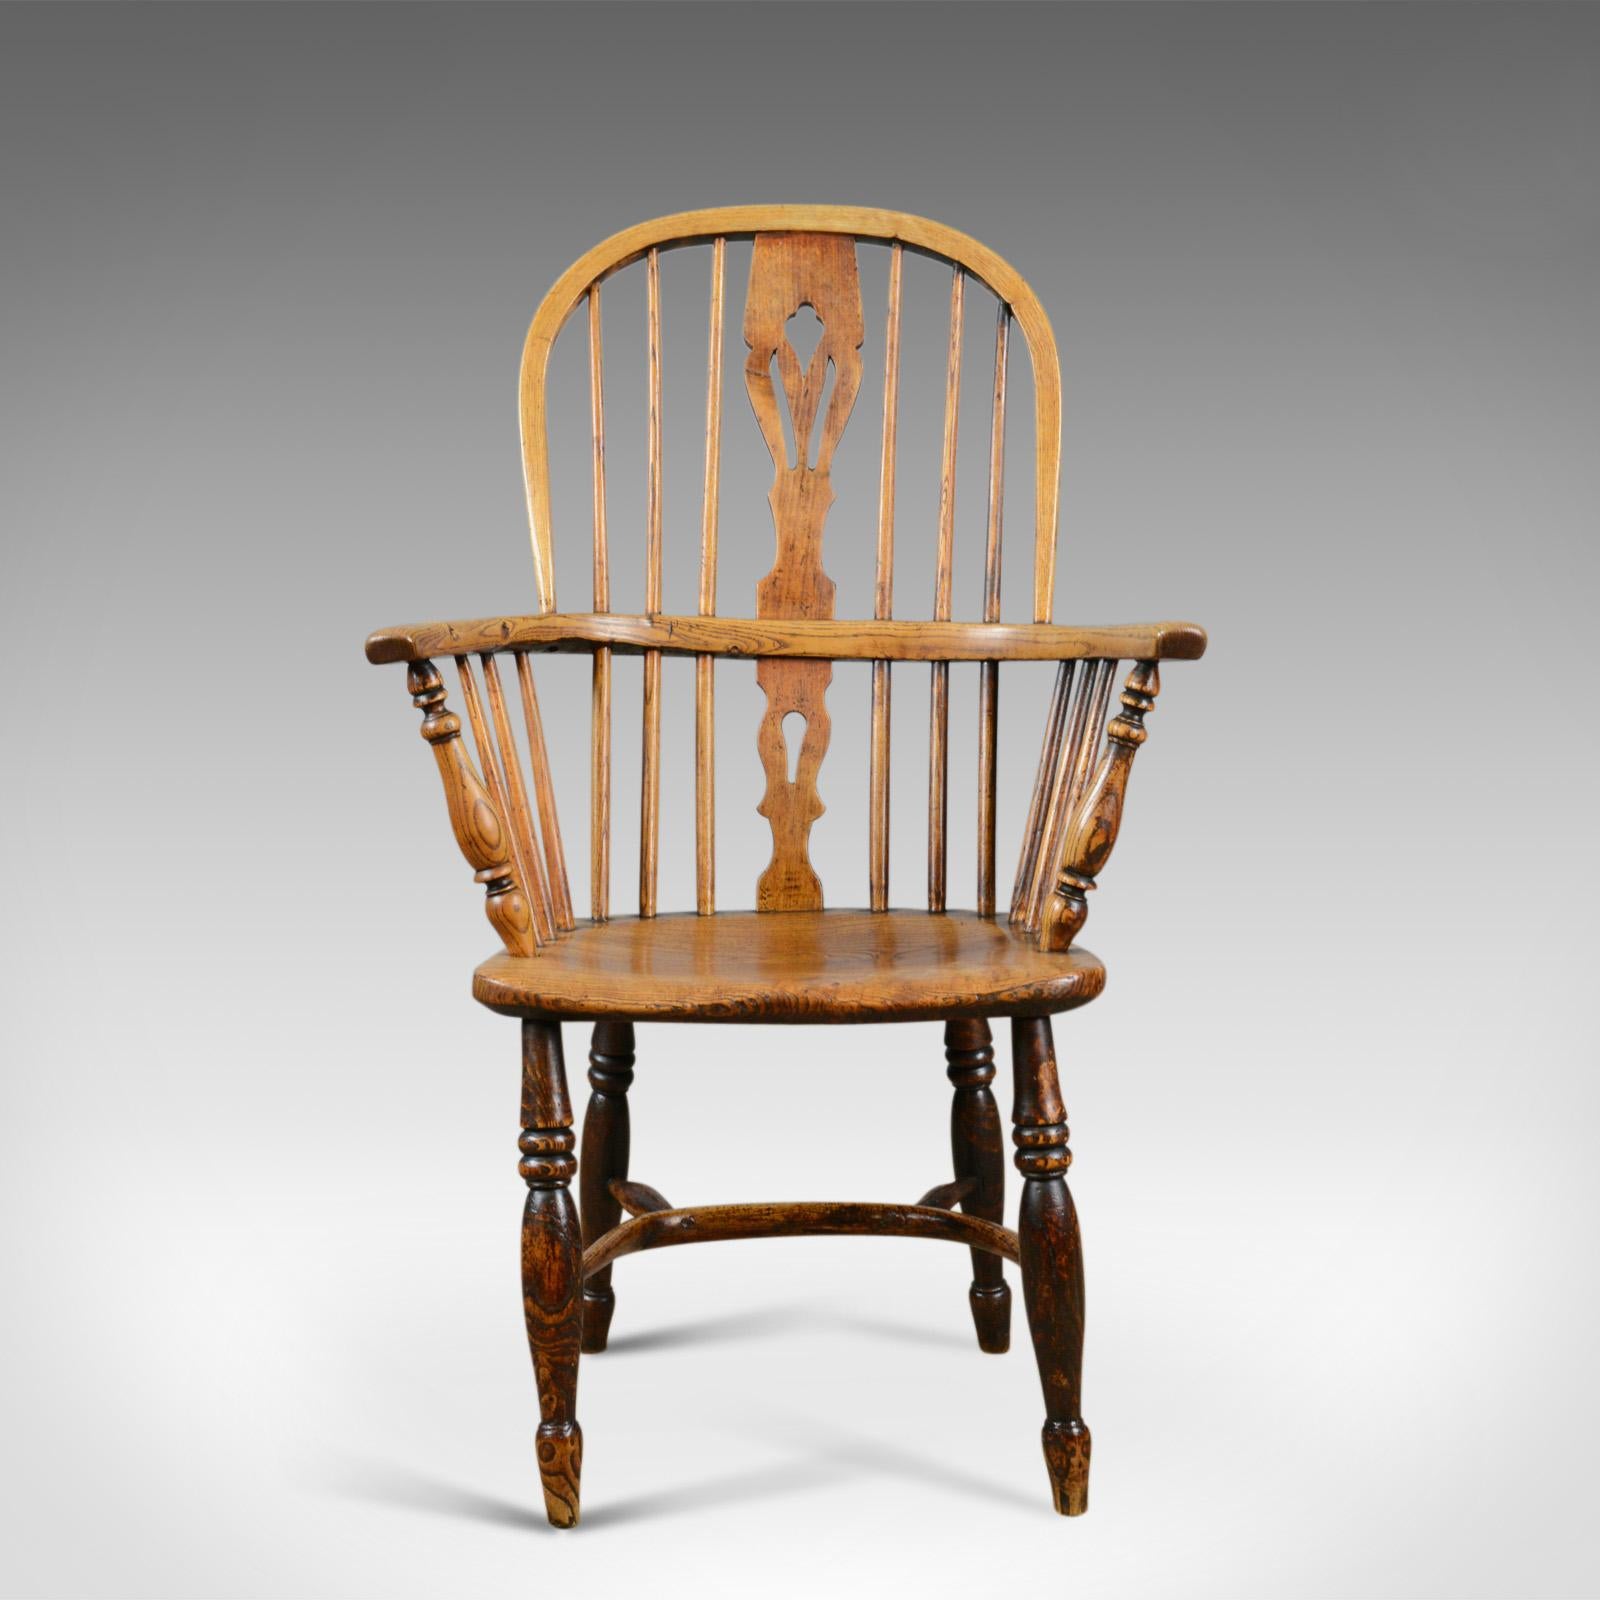 This is an antique Windsor elbow chair, a Victorian, double hoop armchair in elm and ash and dating to circa the mid-19th century, circa 1850.

Classic English, country, elbow chair
Triple fret-cut back splat over key hole lower
Raked, bentwood